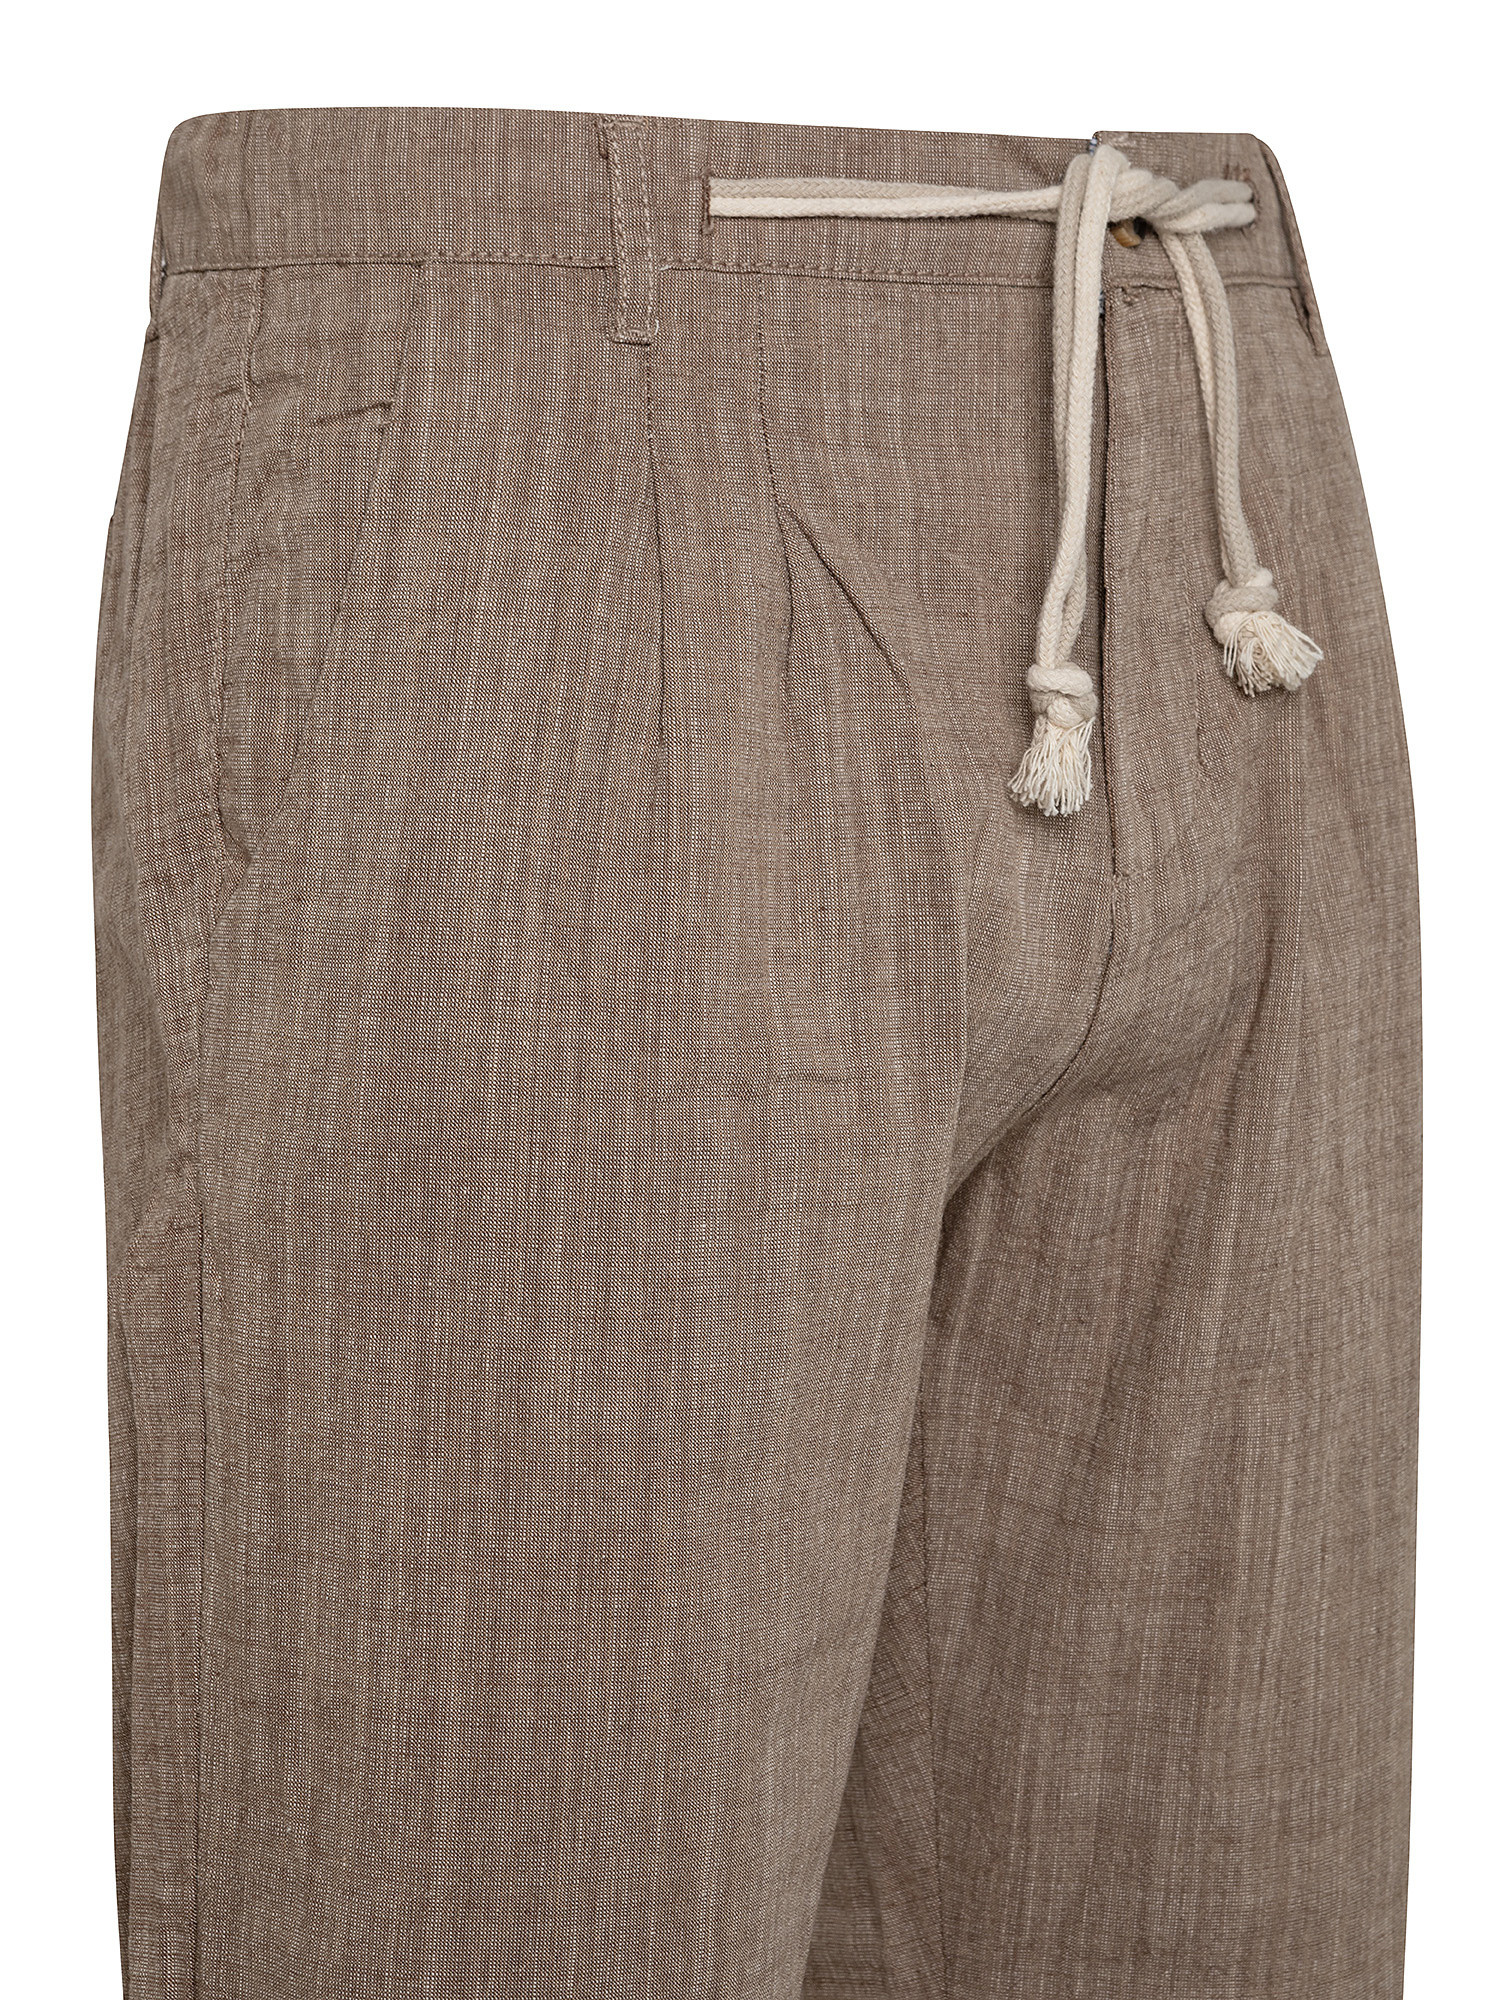 Trousers with drawstring, Beige, large image number 2